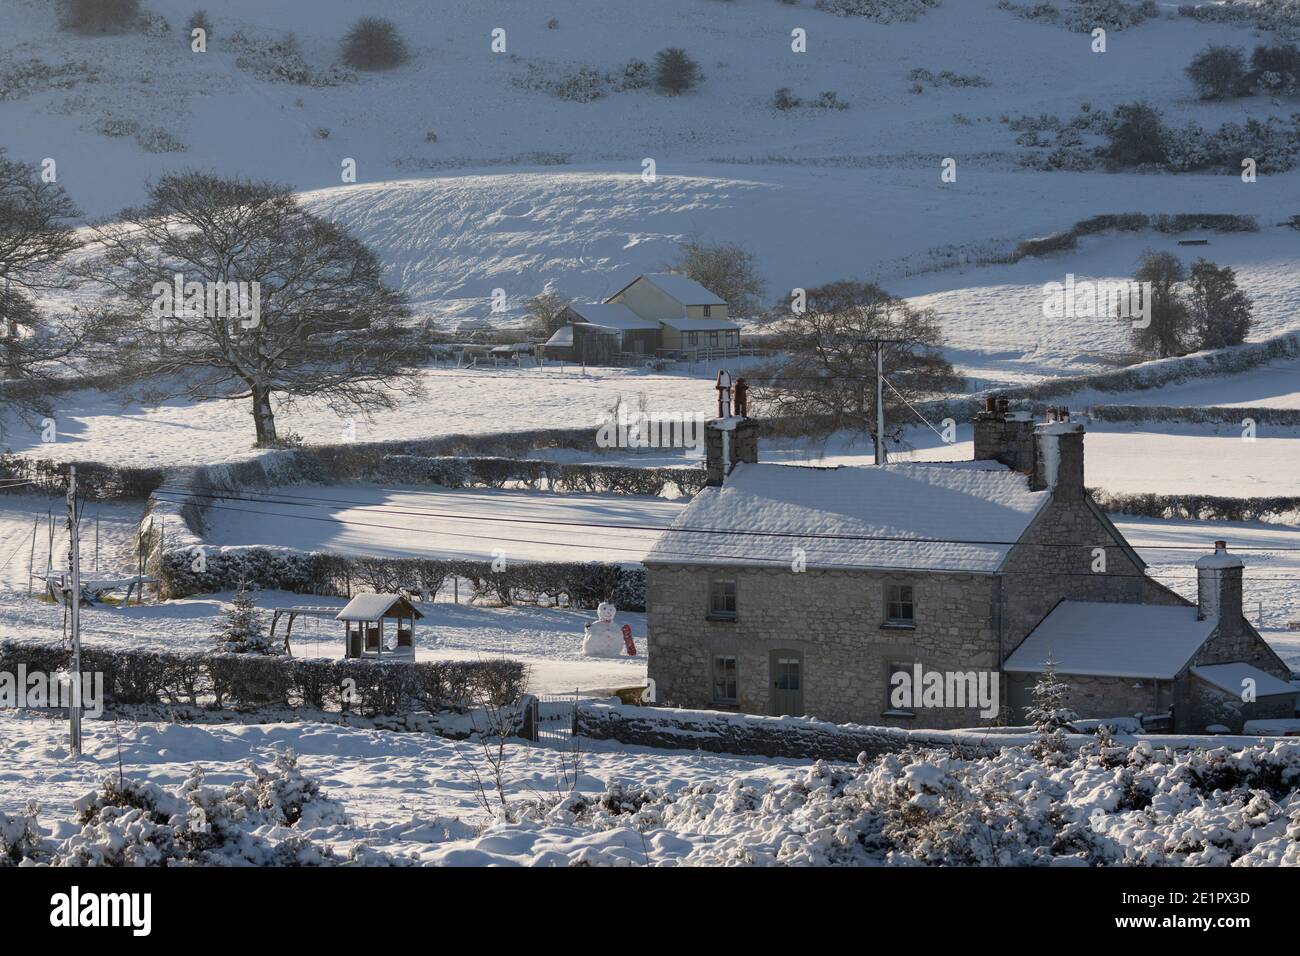 Flintshire, North Wales, UK Saturday 9th January 2021, UK Weather:  Freezing overnight temperatures and heavy snowfall during Covid lockdown in Flintshire, North Wales.  A cottage in the village of Rhes-y-Cae surrounded by a frozen landscape, Flintshire, North Wales  © DGDImages/Alamy Live News Stock Photo